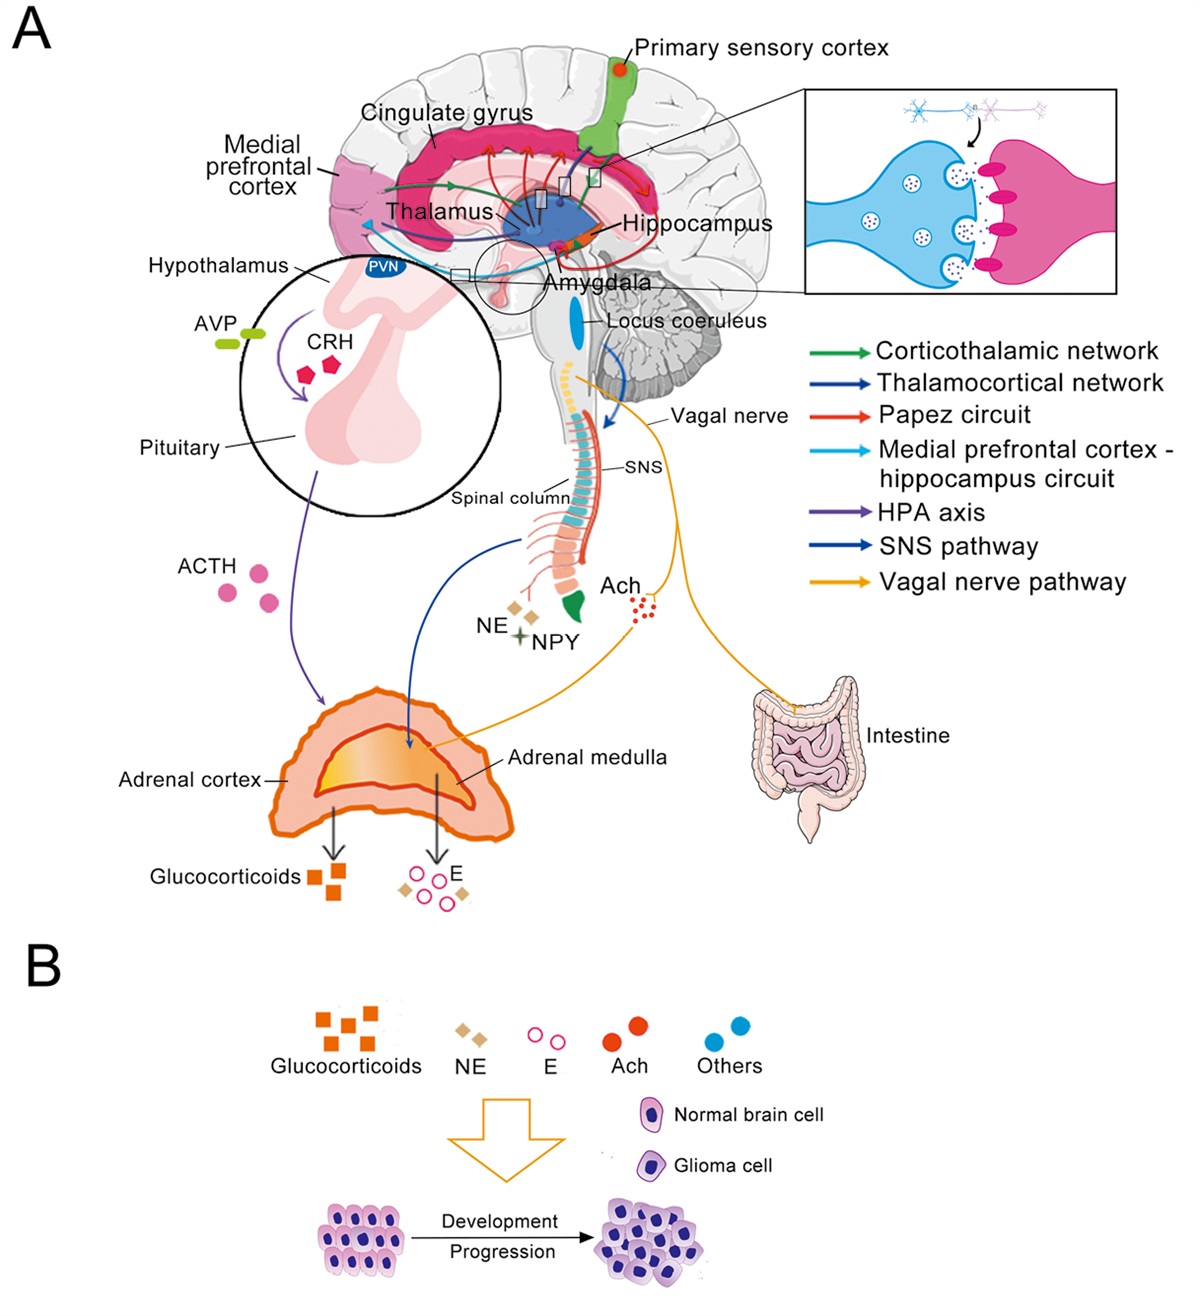 Chronic stress as an emerging risk factor for the development and progression of glioma